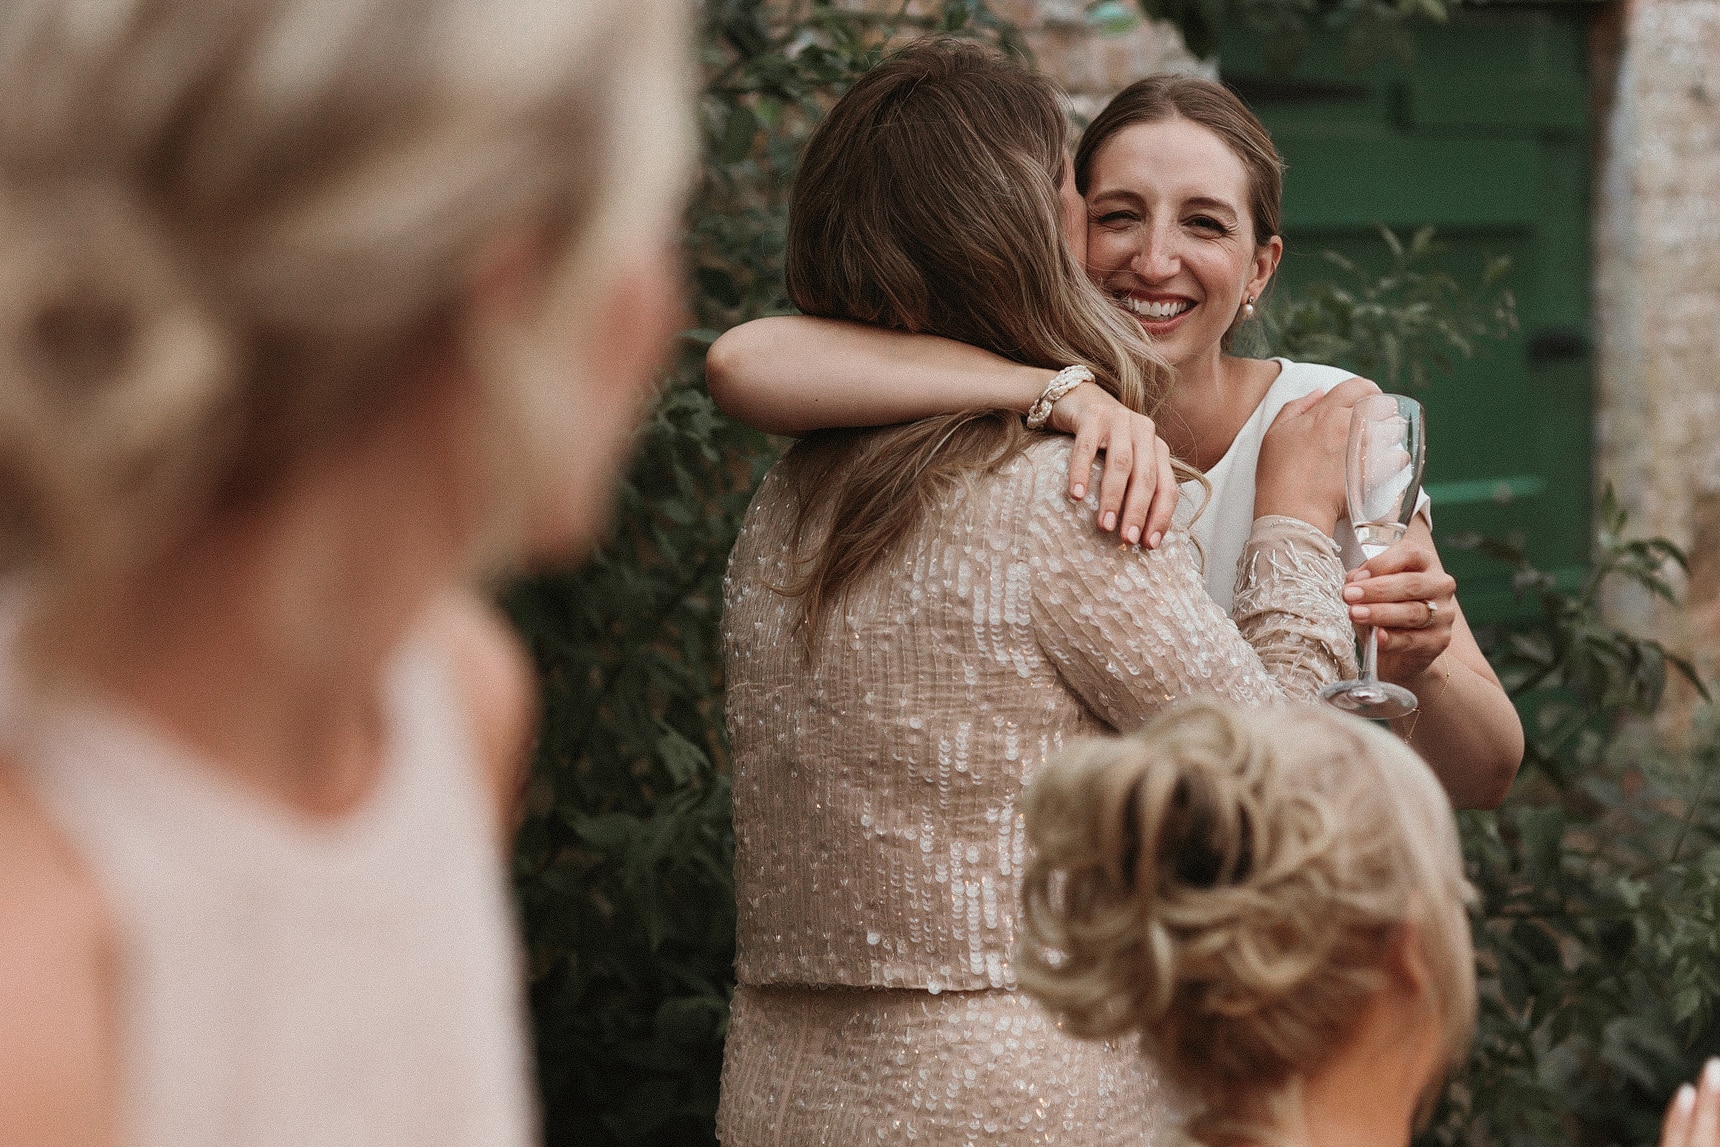 Bride with a glass of champagne in her hand and given her bridesmaid a hug with her free arm